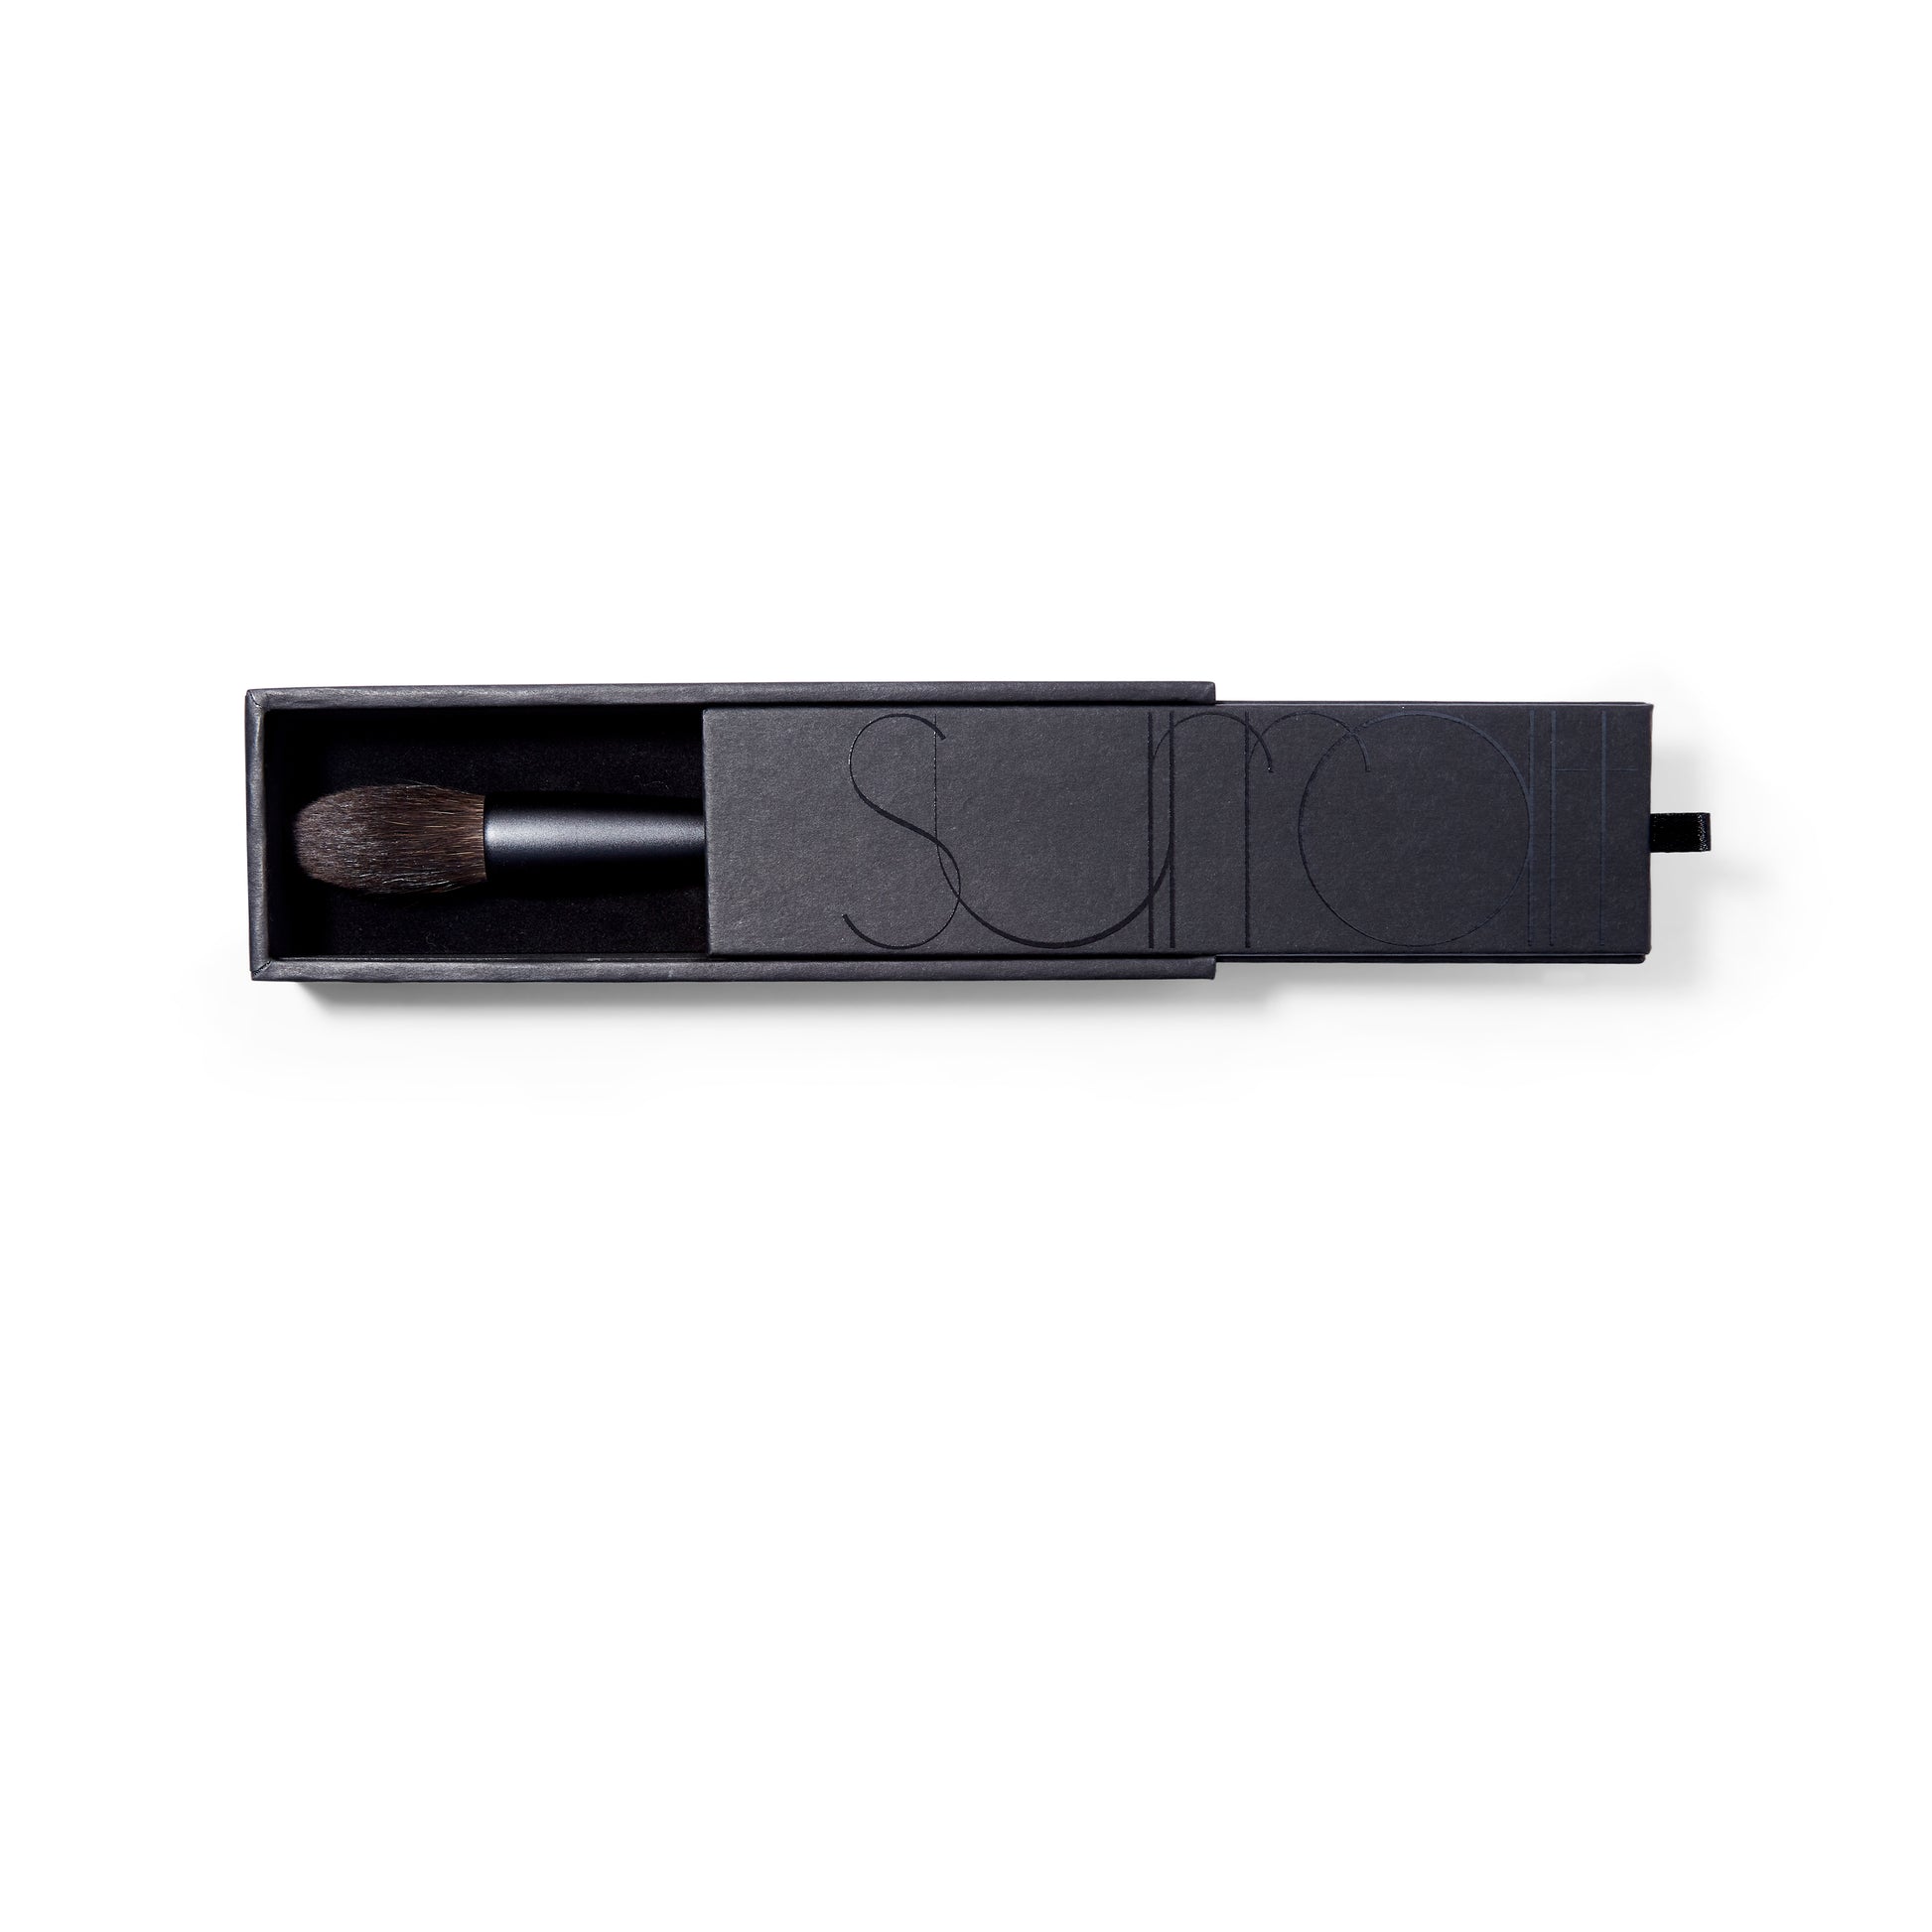 Surratt Artistique black handled makeup brush for blush or highlighter with natural bristles. Brush is tapered to a soft point. Brush is in a sturdy black box with velvet lining.